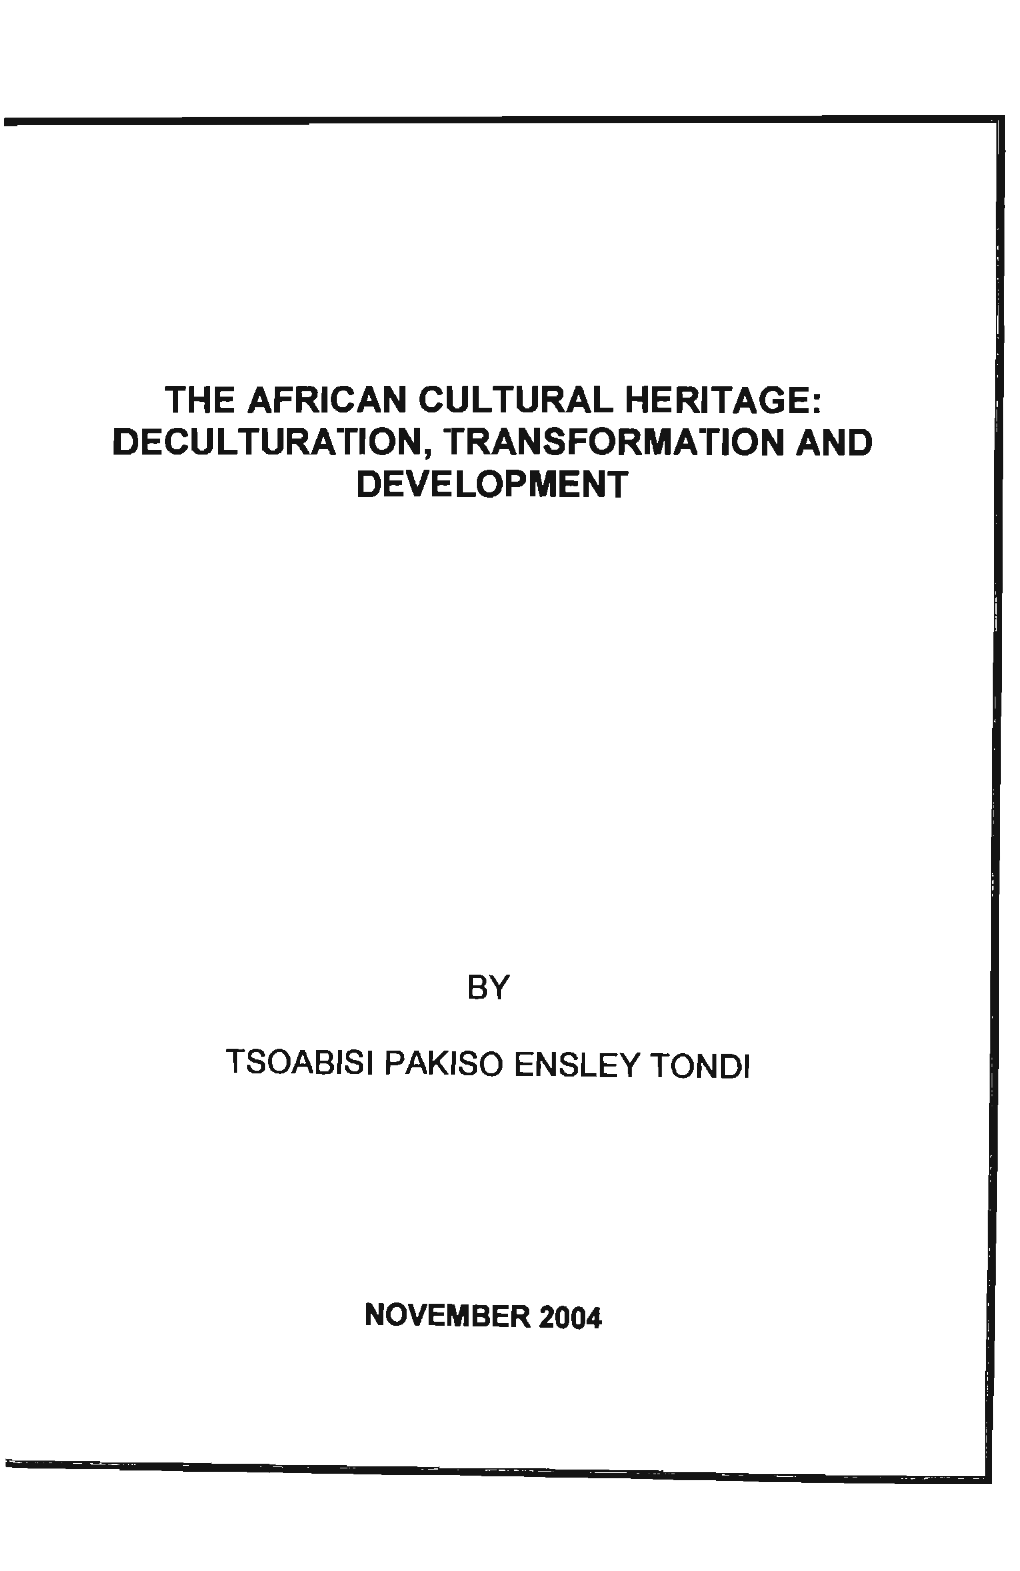 The African Cultural Heritage: Oecultura Tion, Transformation and Development